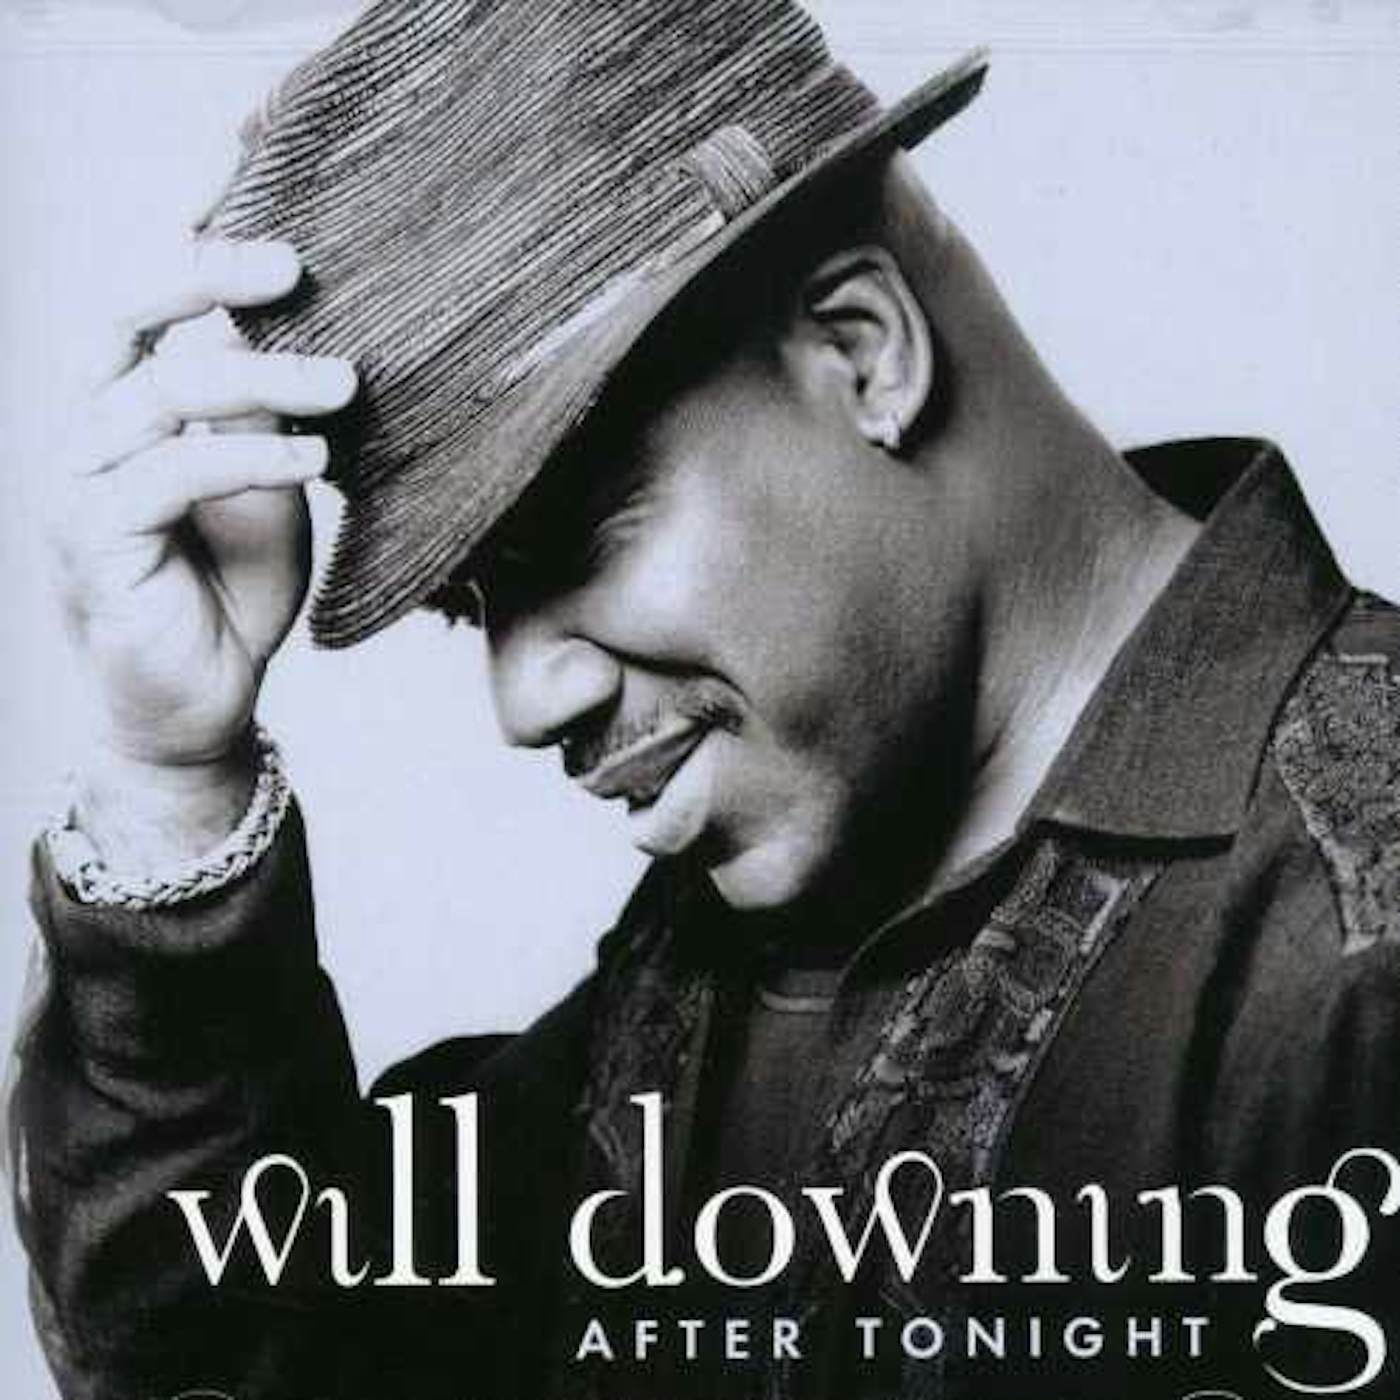 Will Downing AFTER TONIGHT CD